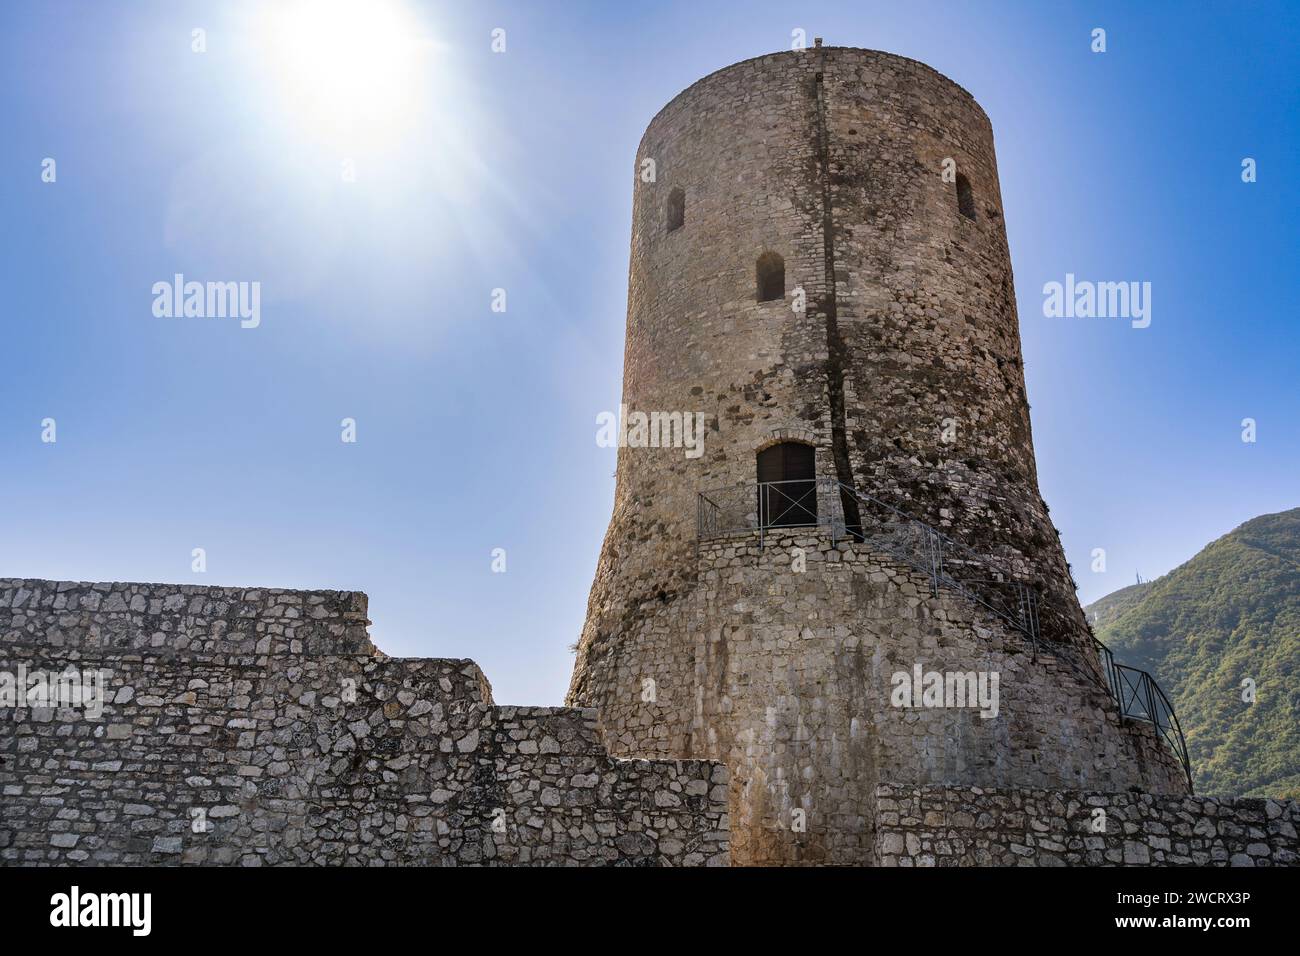 Summonte, province of Avelllino. the view of the medieval tower of the castle of Summonte. Irpinia, Campania, Italy. Stock Photo